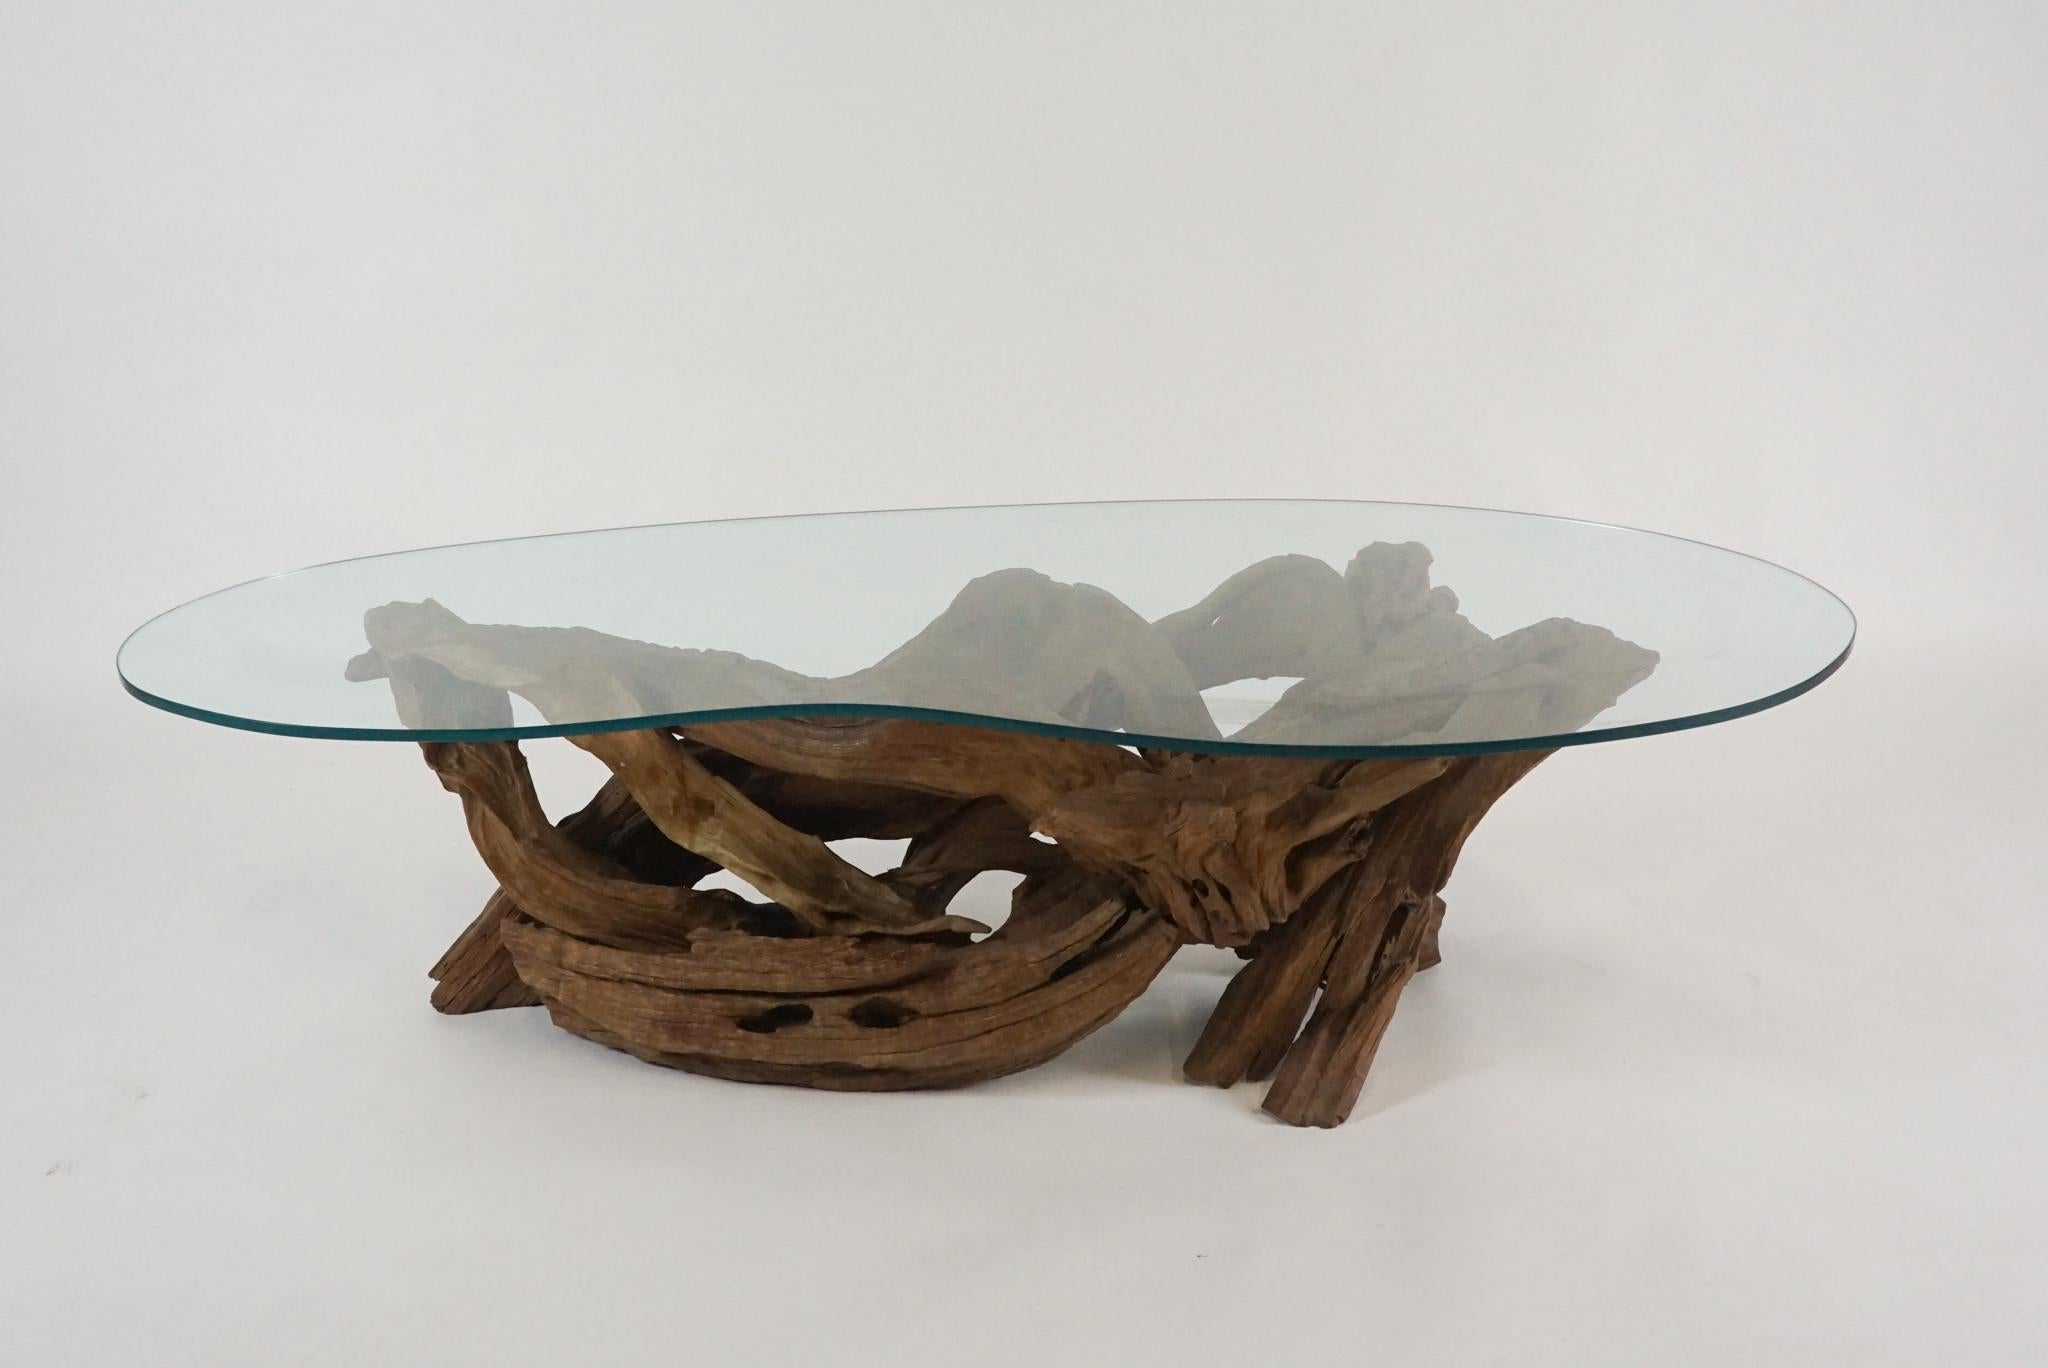 Stunning example of a Classic Mid-Century Modern driftwood coffee table. This species is quite heavy in weight with a lovely and perfectly complimentary biomorphic glass top.
  